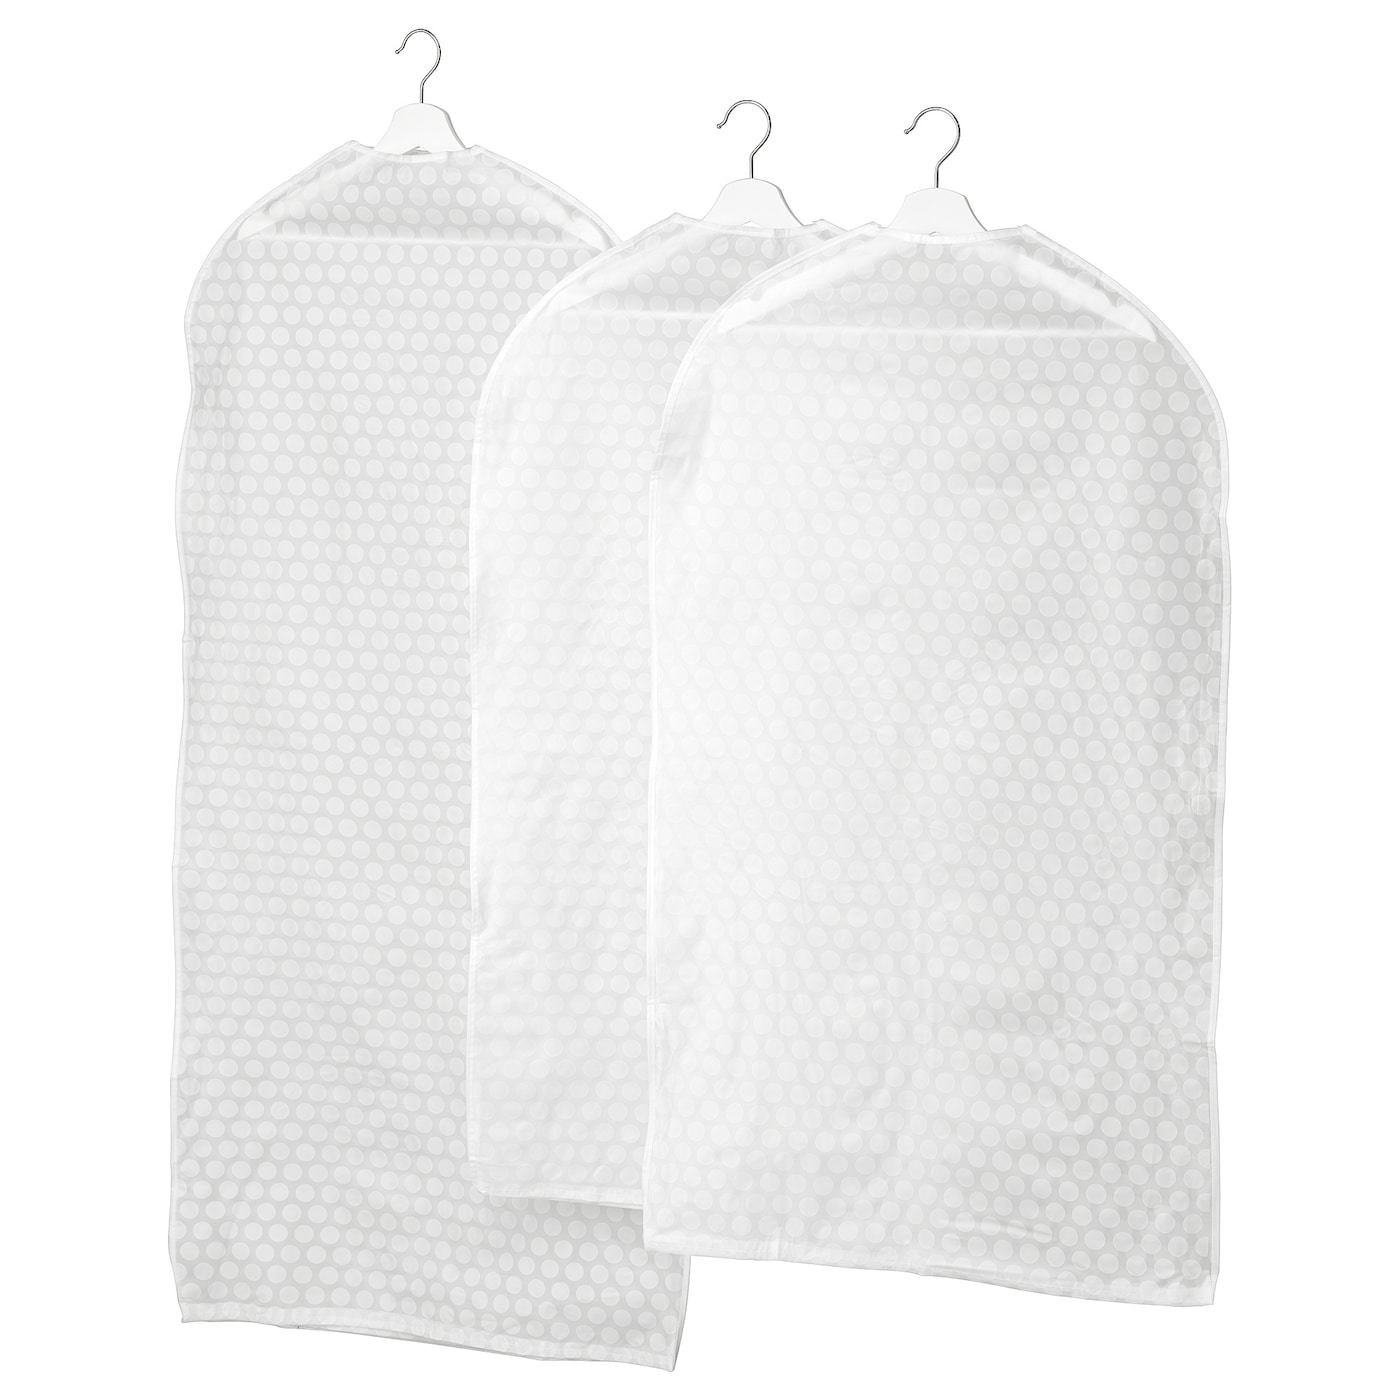 pluring-clothes-cover-set-of-3-transparent-white__0710648_pe727692_s5